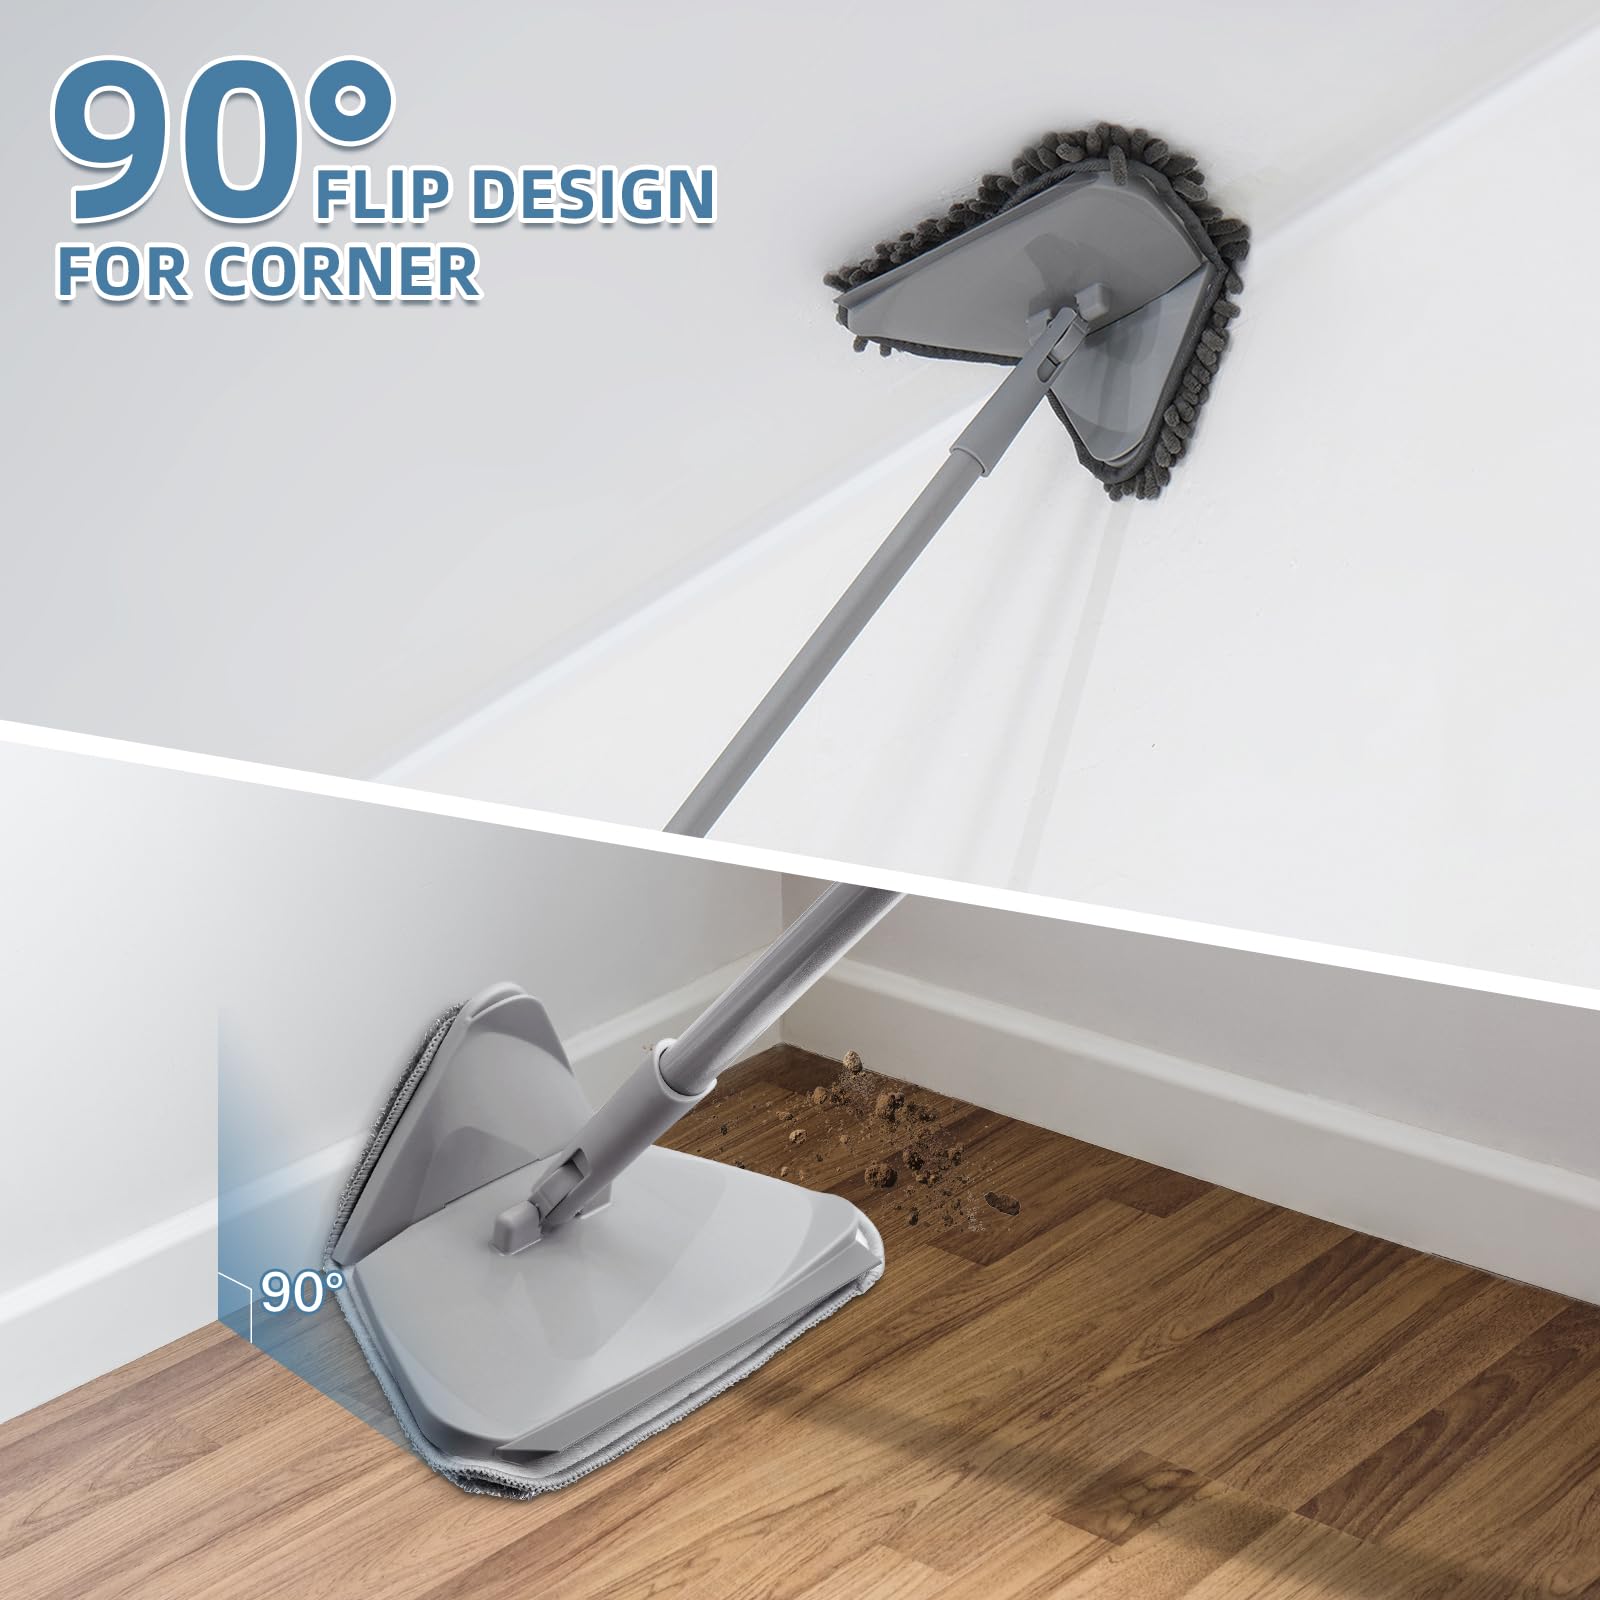 Wall Cleaner Mop with Long Handle, 82 Inches, 3-in-1 Ceiling Cleaning Tool Duster for Cleaning Painted Walls, Windows, Floors, Baseboards, Ceilings